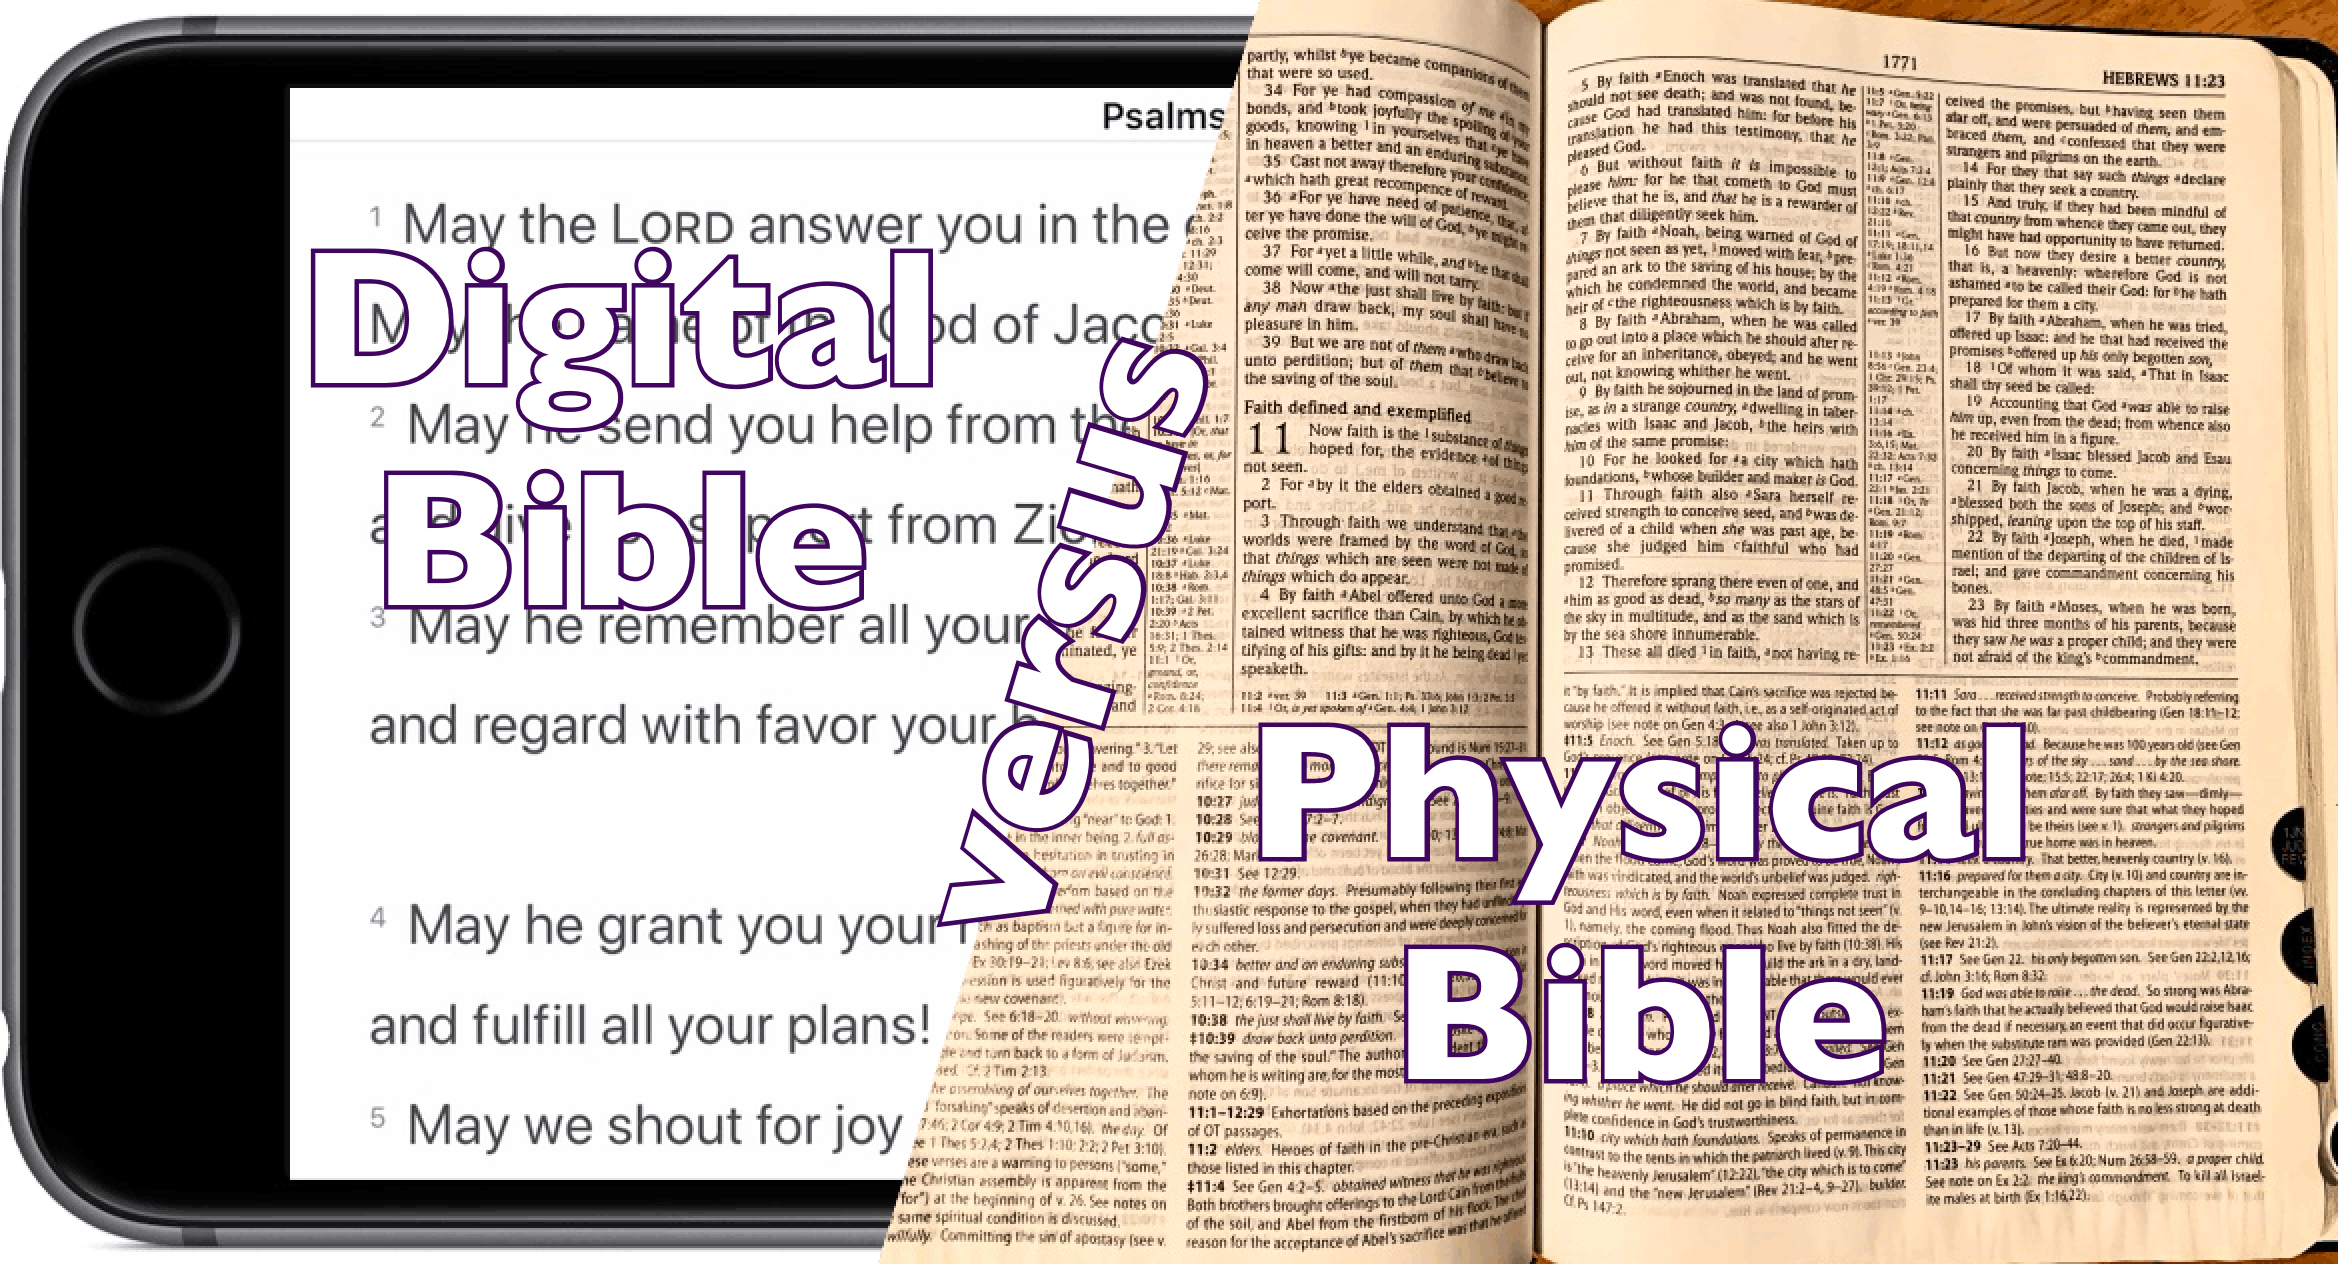 15 Reasons to Use a Physical Bible Instead of a Digital Bible